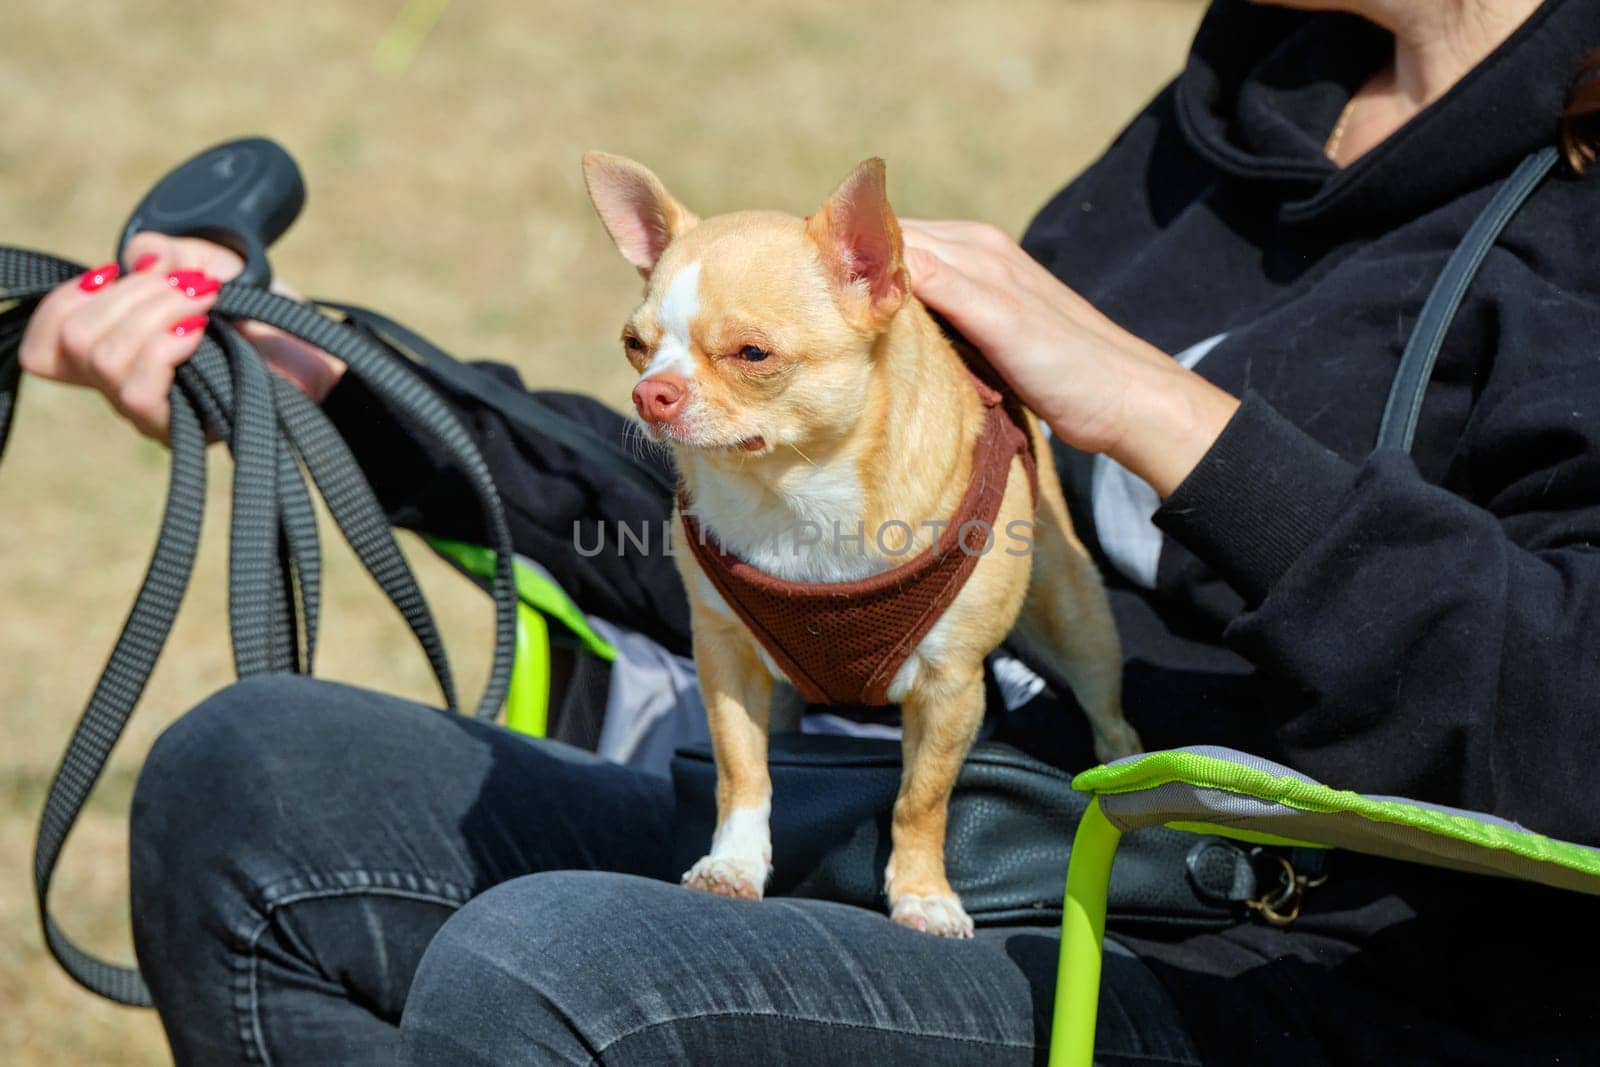 A Chihuahua dog in the arms of a person with disabilities sitting on an armchair